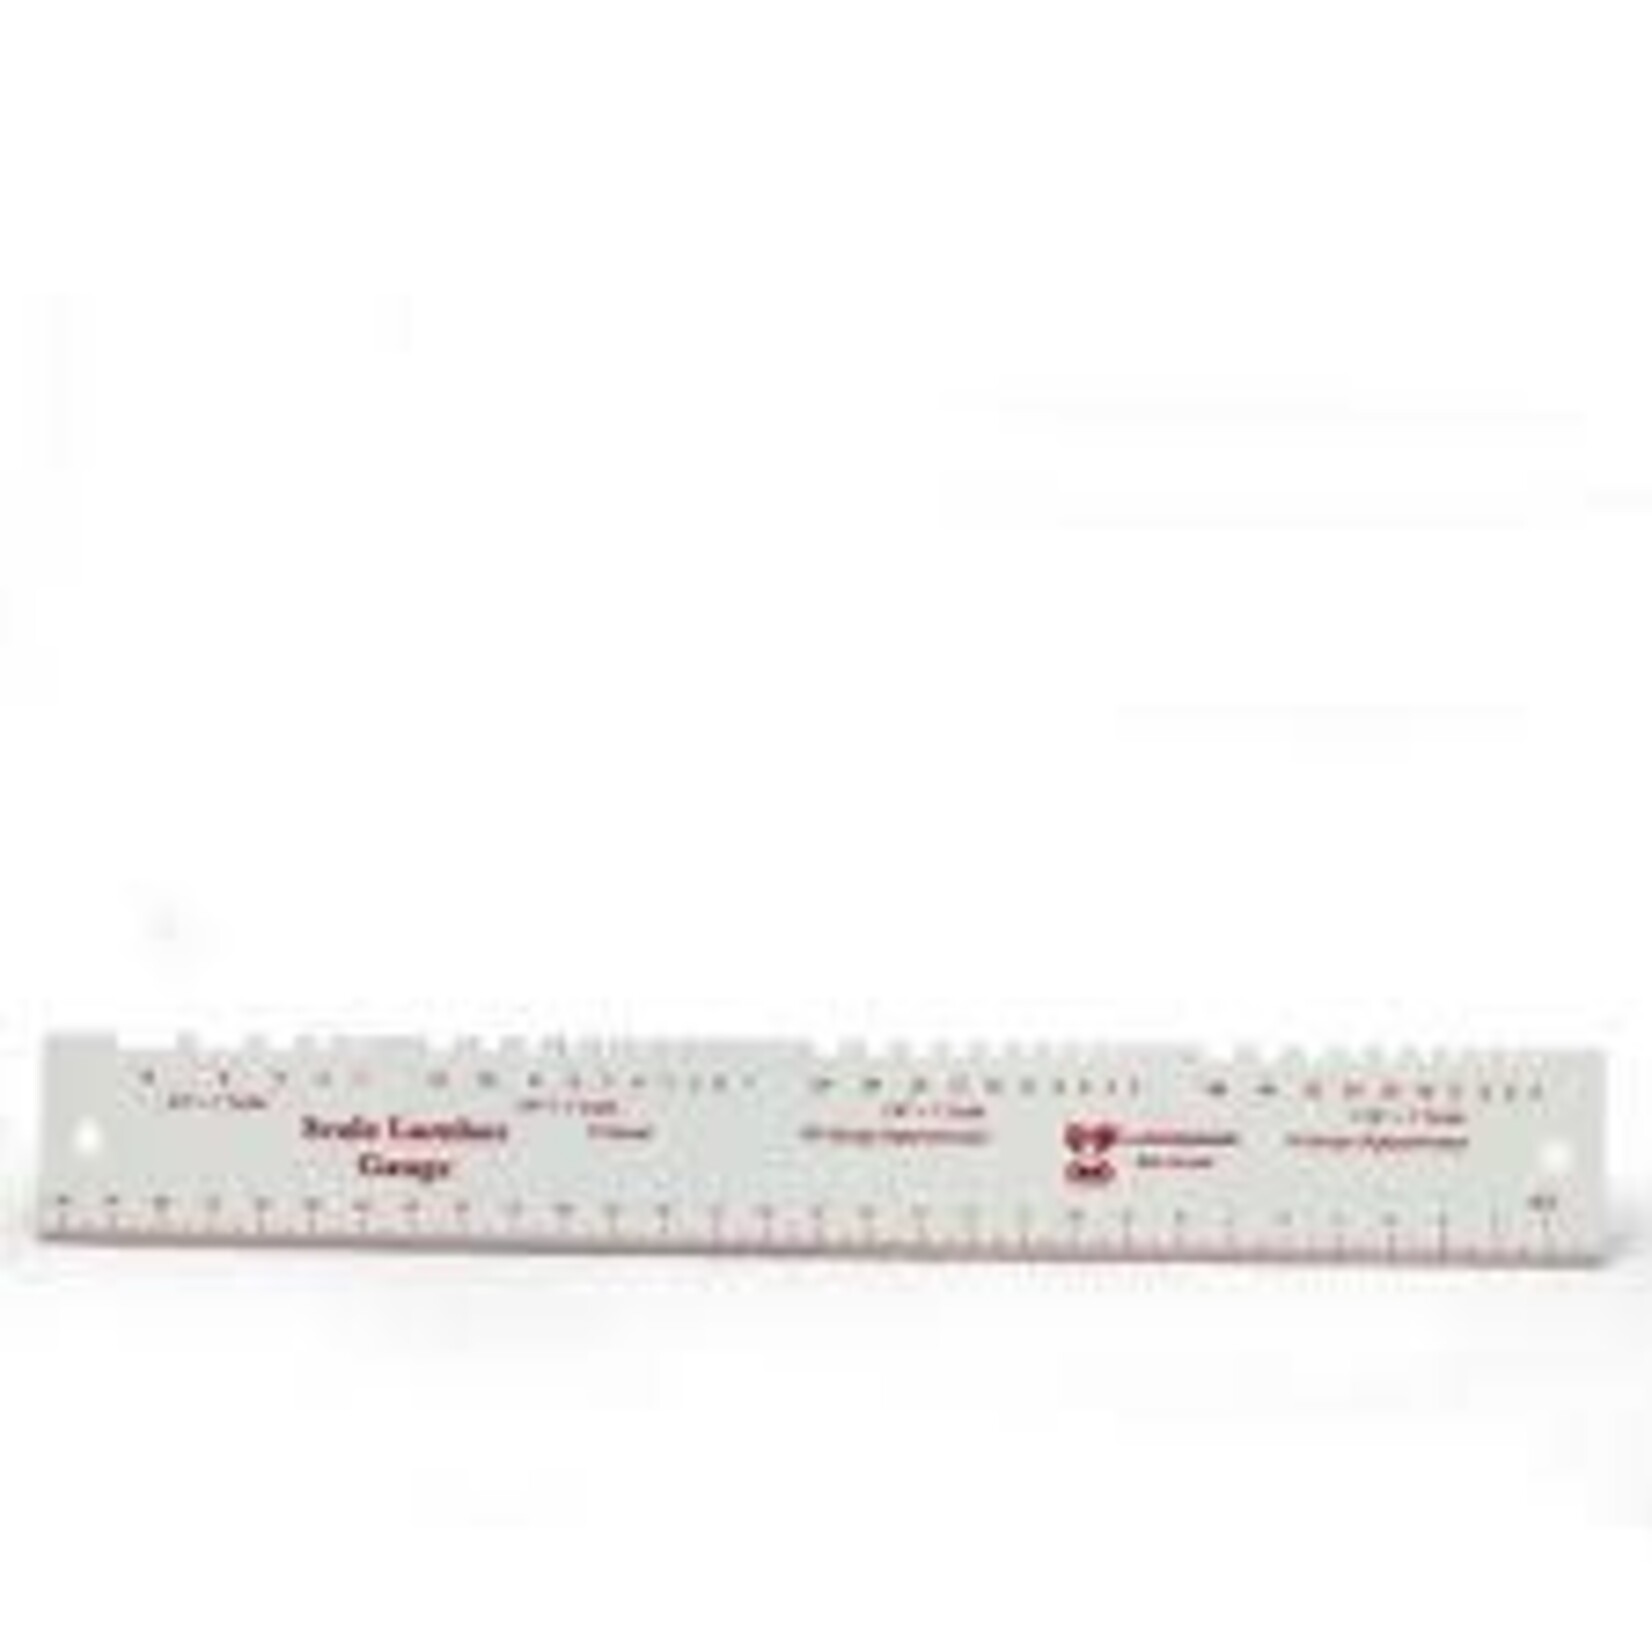 Midwest Products 1124 Scale Lumber Gauge